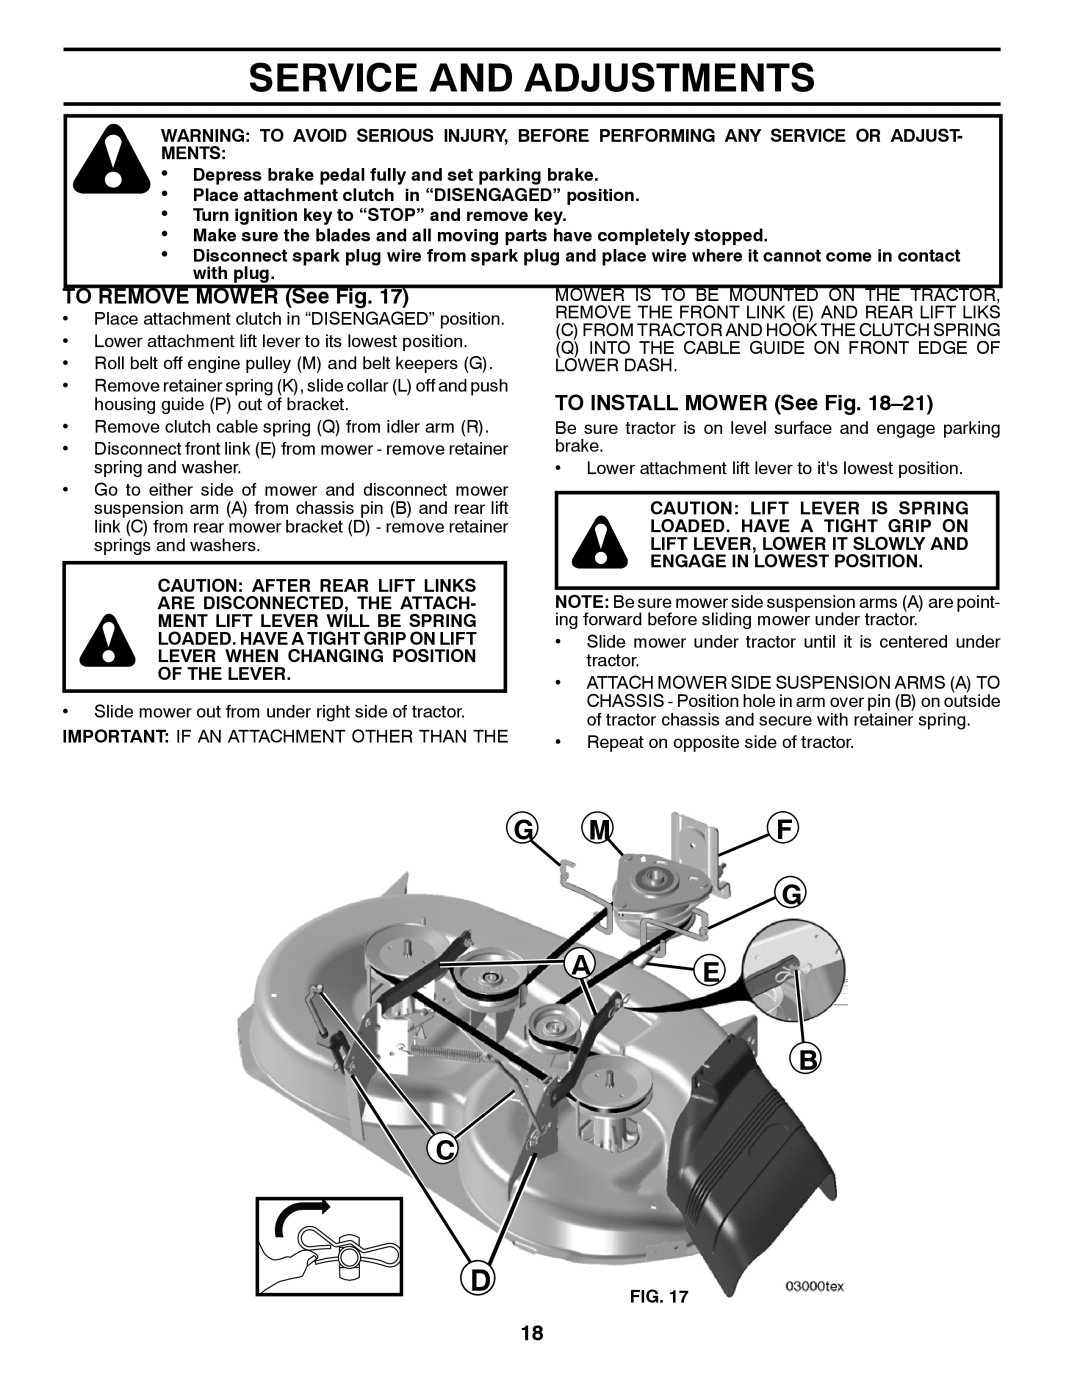 Husqvarna YTH2146XP owner manual Service And Adjustments, G Mf G A E B C, TO REMOVE MOWER See Fig, TO INSTALL MOWER See Fig 